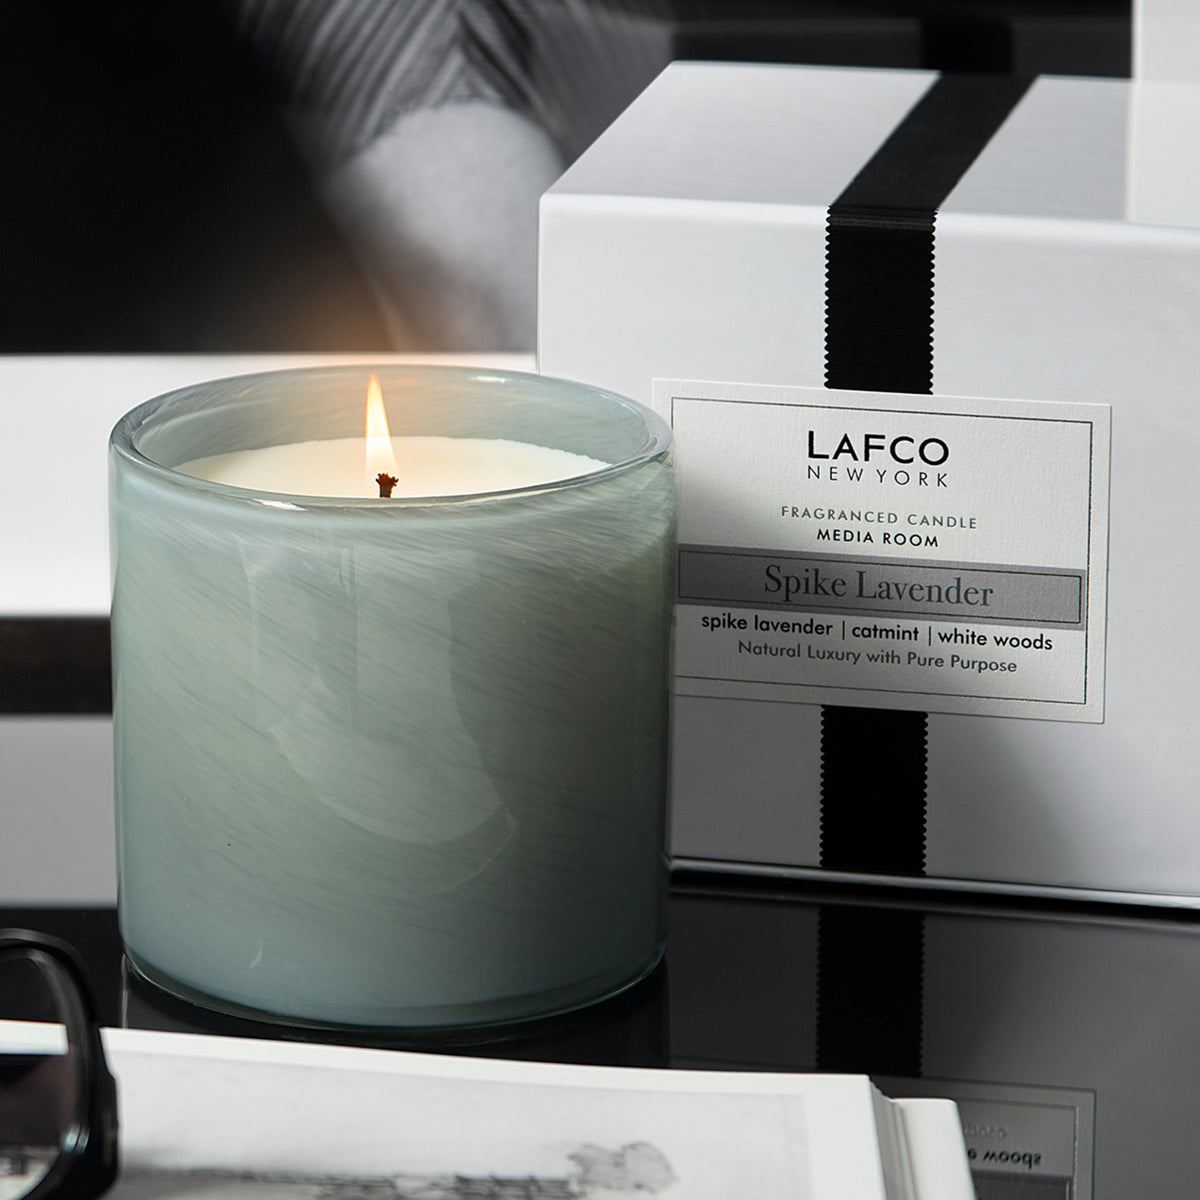 Lafco Spike Lavender Signature Candle .